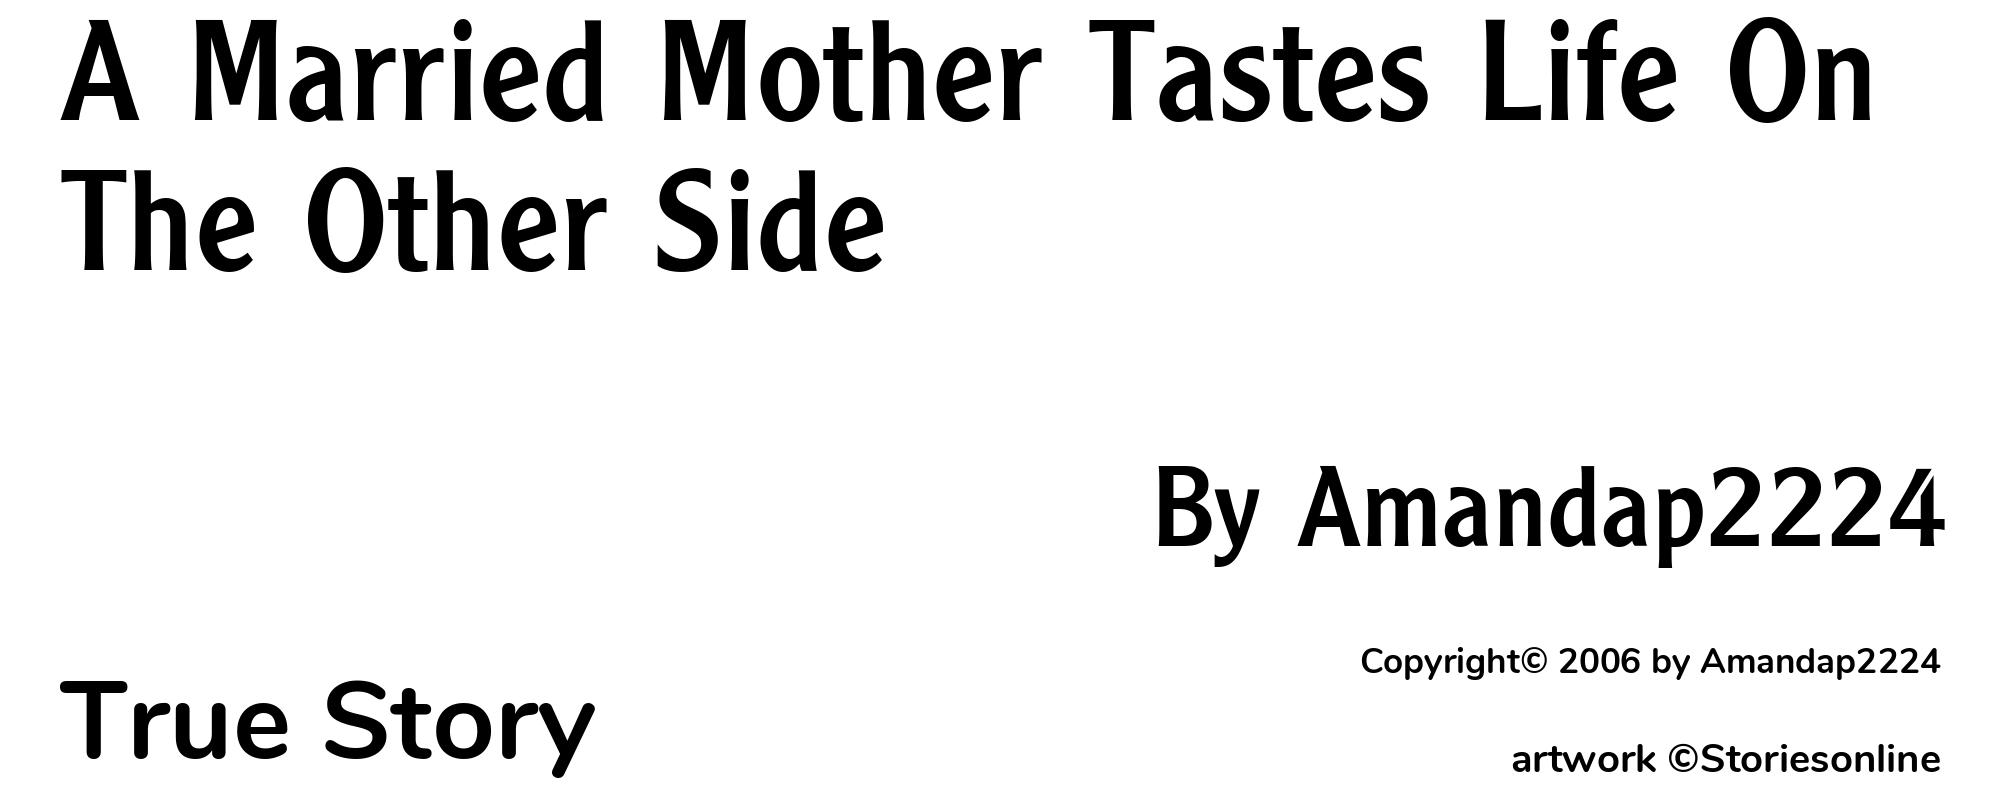 A Married Mother Tastes Life On The Other Side - Cover